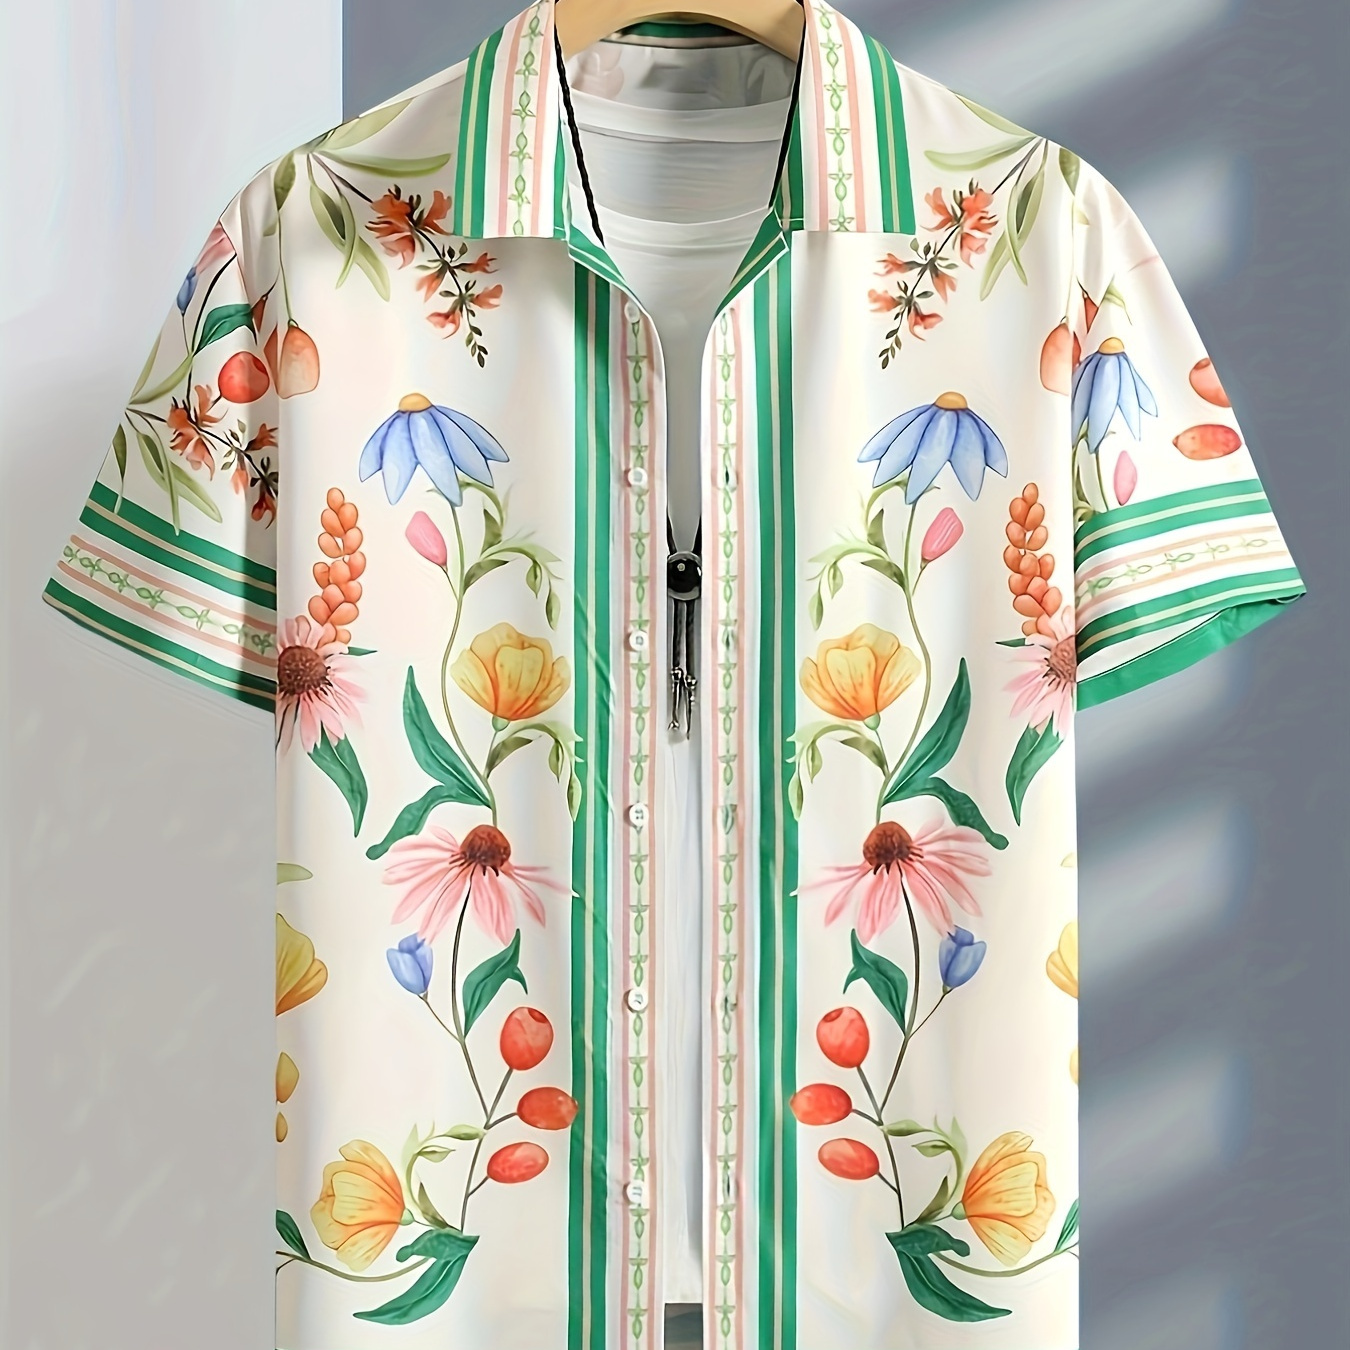 

Men's Floral Graphic Pattern And Stripe Print Lapel Shirt With Button Down Placket And Short Sleeve, Fashionable And Chic Tops For Men, Suitable For Summer Leisurewear And Vacation